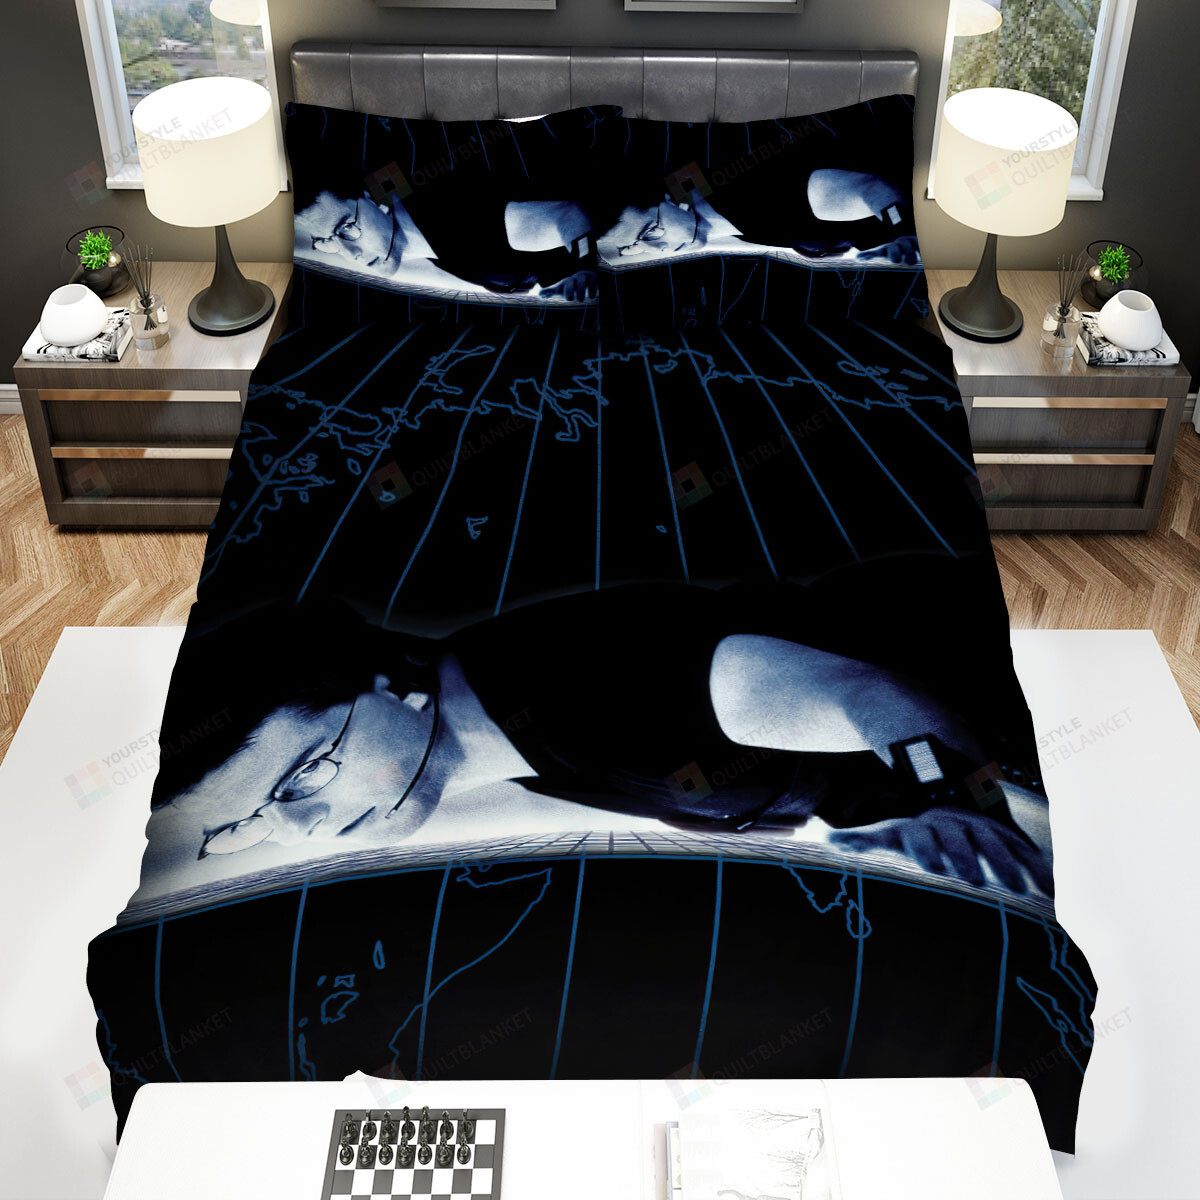 Mission Impossible Ethan Hunt Picture Art  Bed Sheets Spread Comforter Duvet Cover Bedding Sets